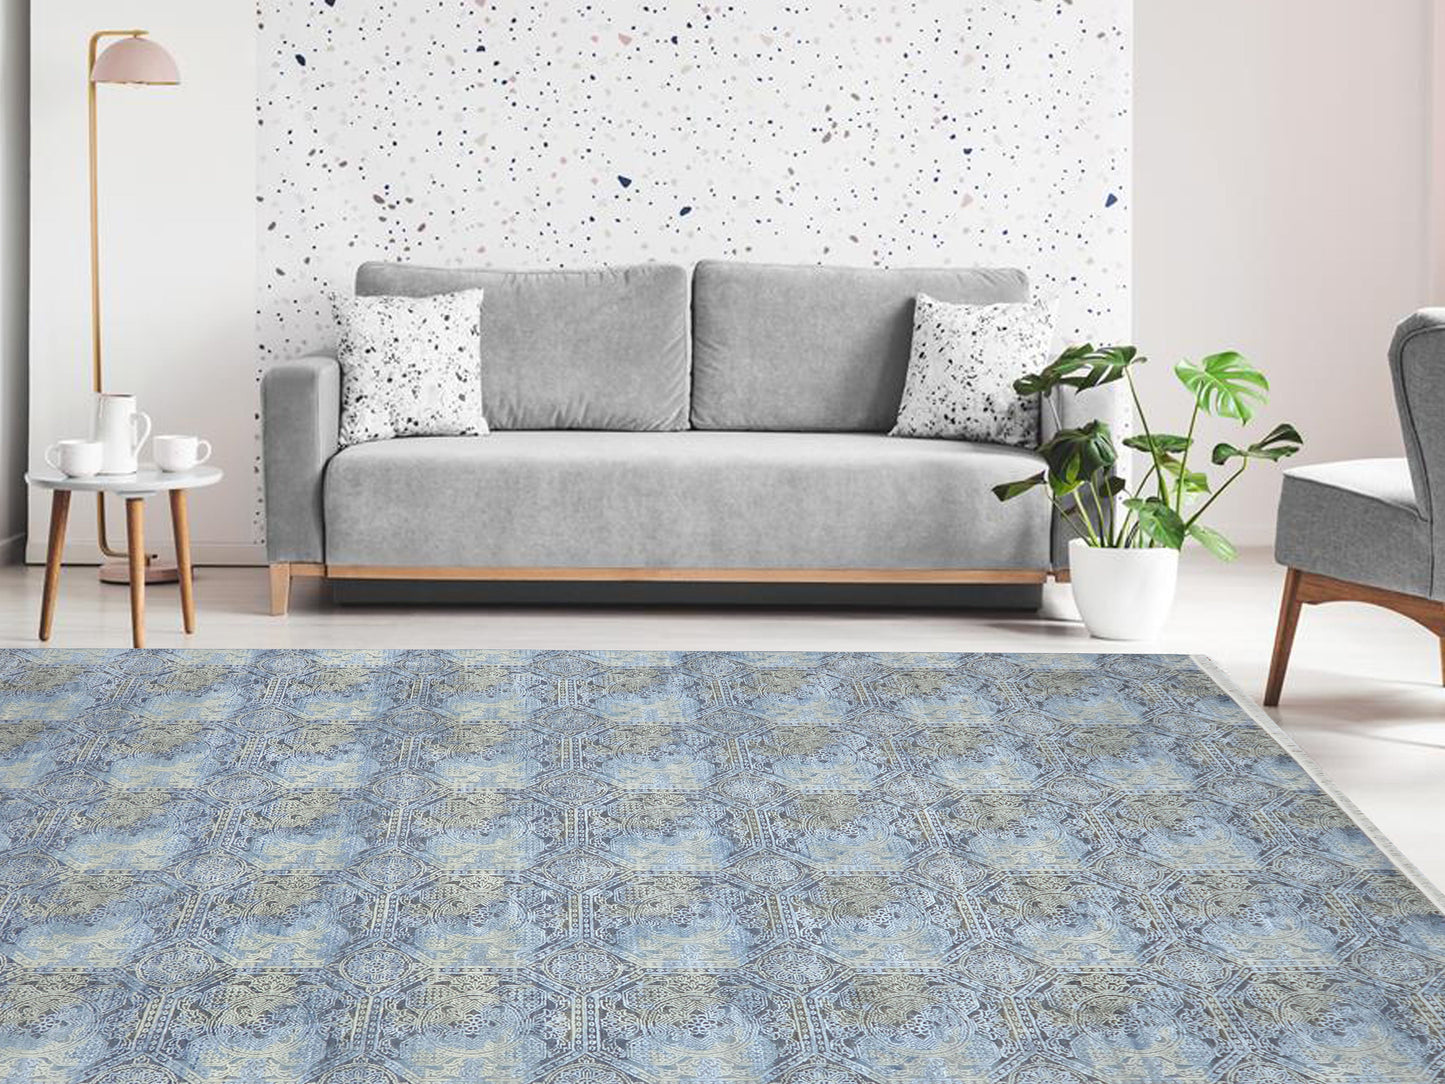 Get trendy with Blue, Grey Silk and Wool Distressed Geometrical Handknotted Area Rug 8.11x12ft 273x365Cms - Contemporary Rugs available at Jaipur Oriental Rugs. Grab yours for $6390.00 today!